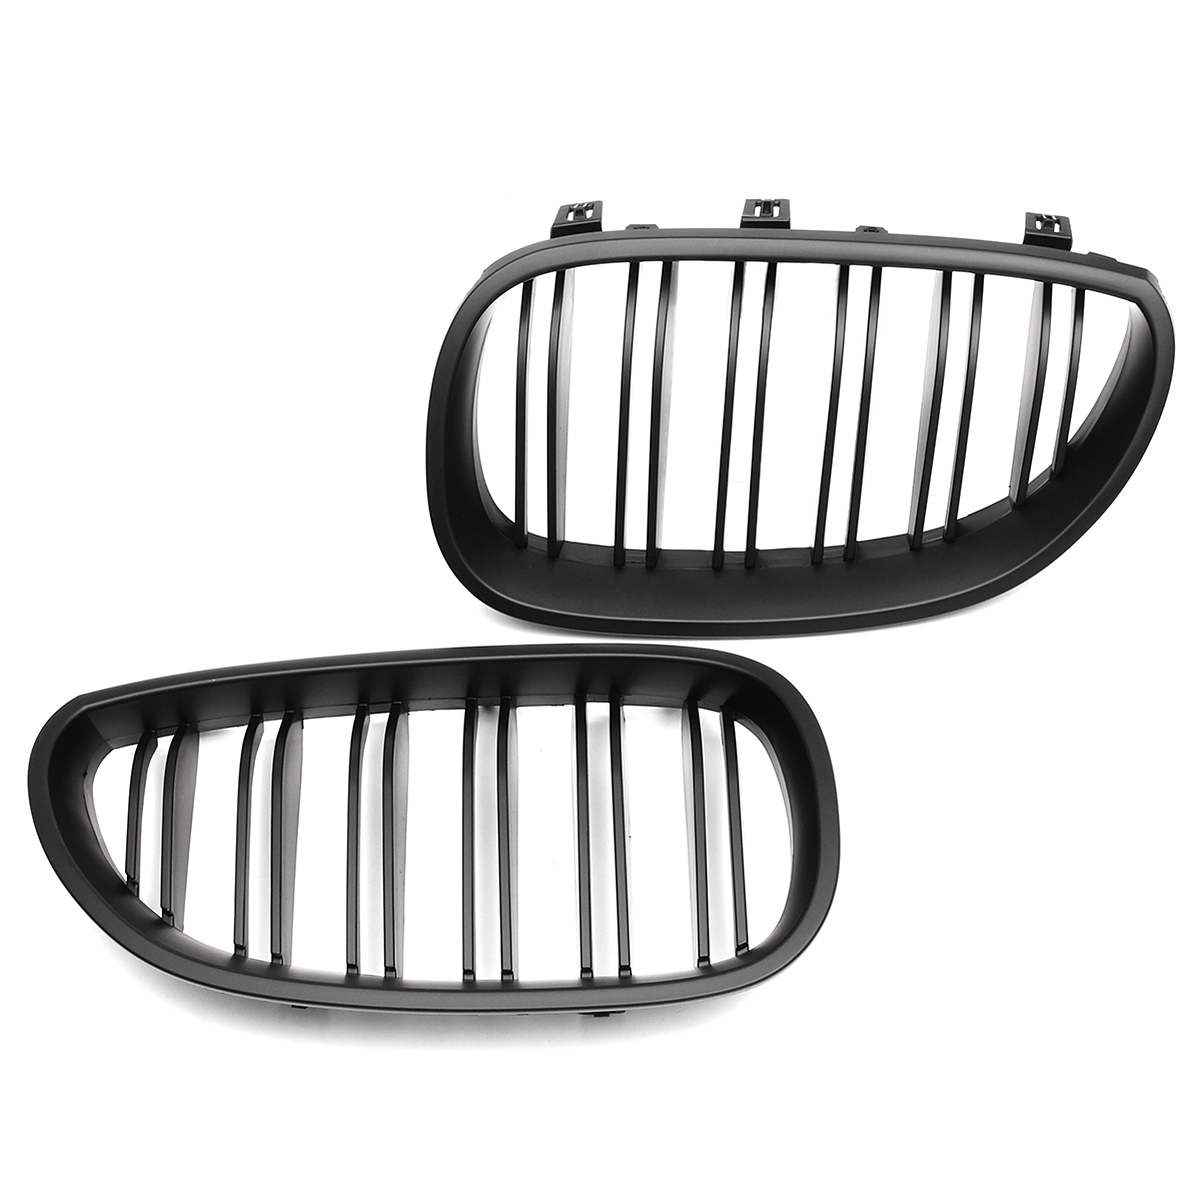 

Pair New Matte Black Front Grill Grille Kidney For BMW E60 E61 5 Series M5 03-09